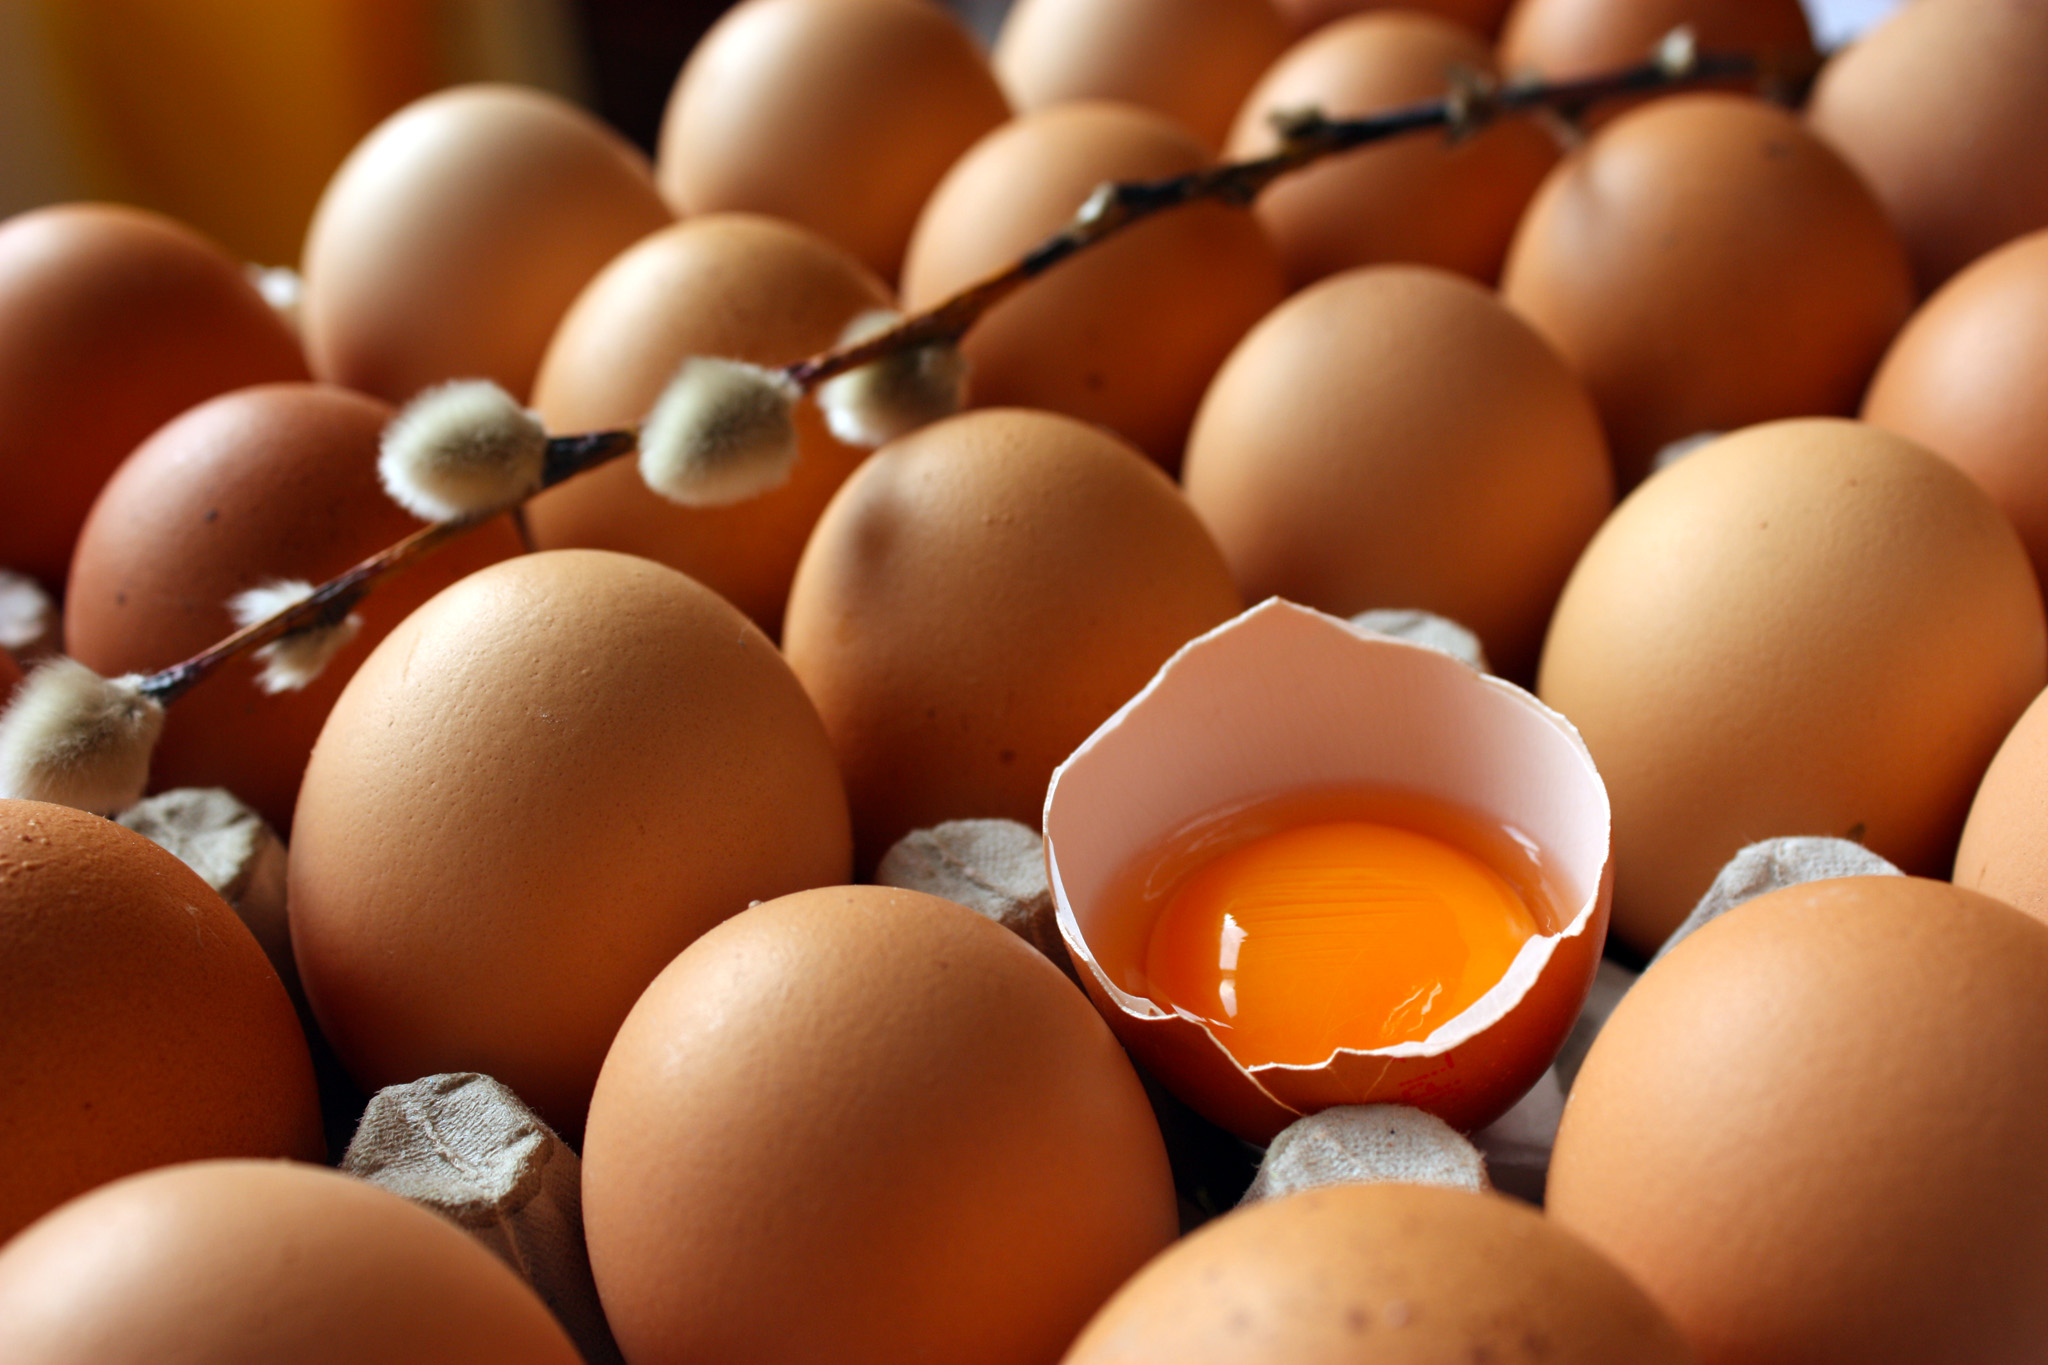 Recycled eggshells can be used for next-gen data storage